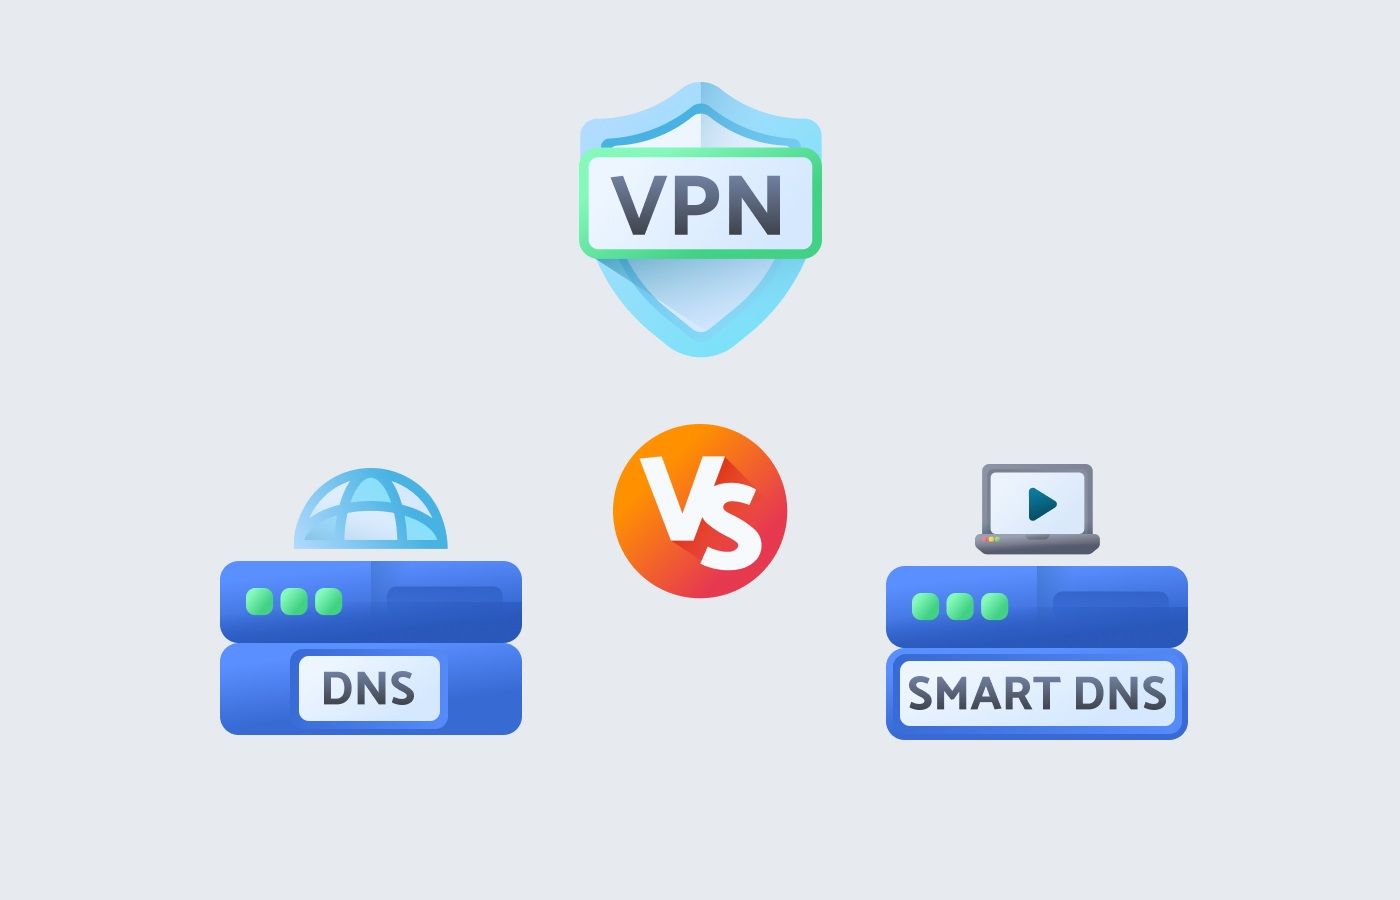 Is it better to change DNS or use VPN?